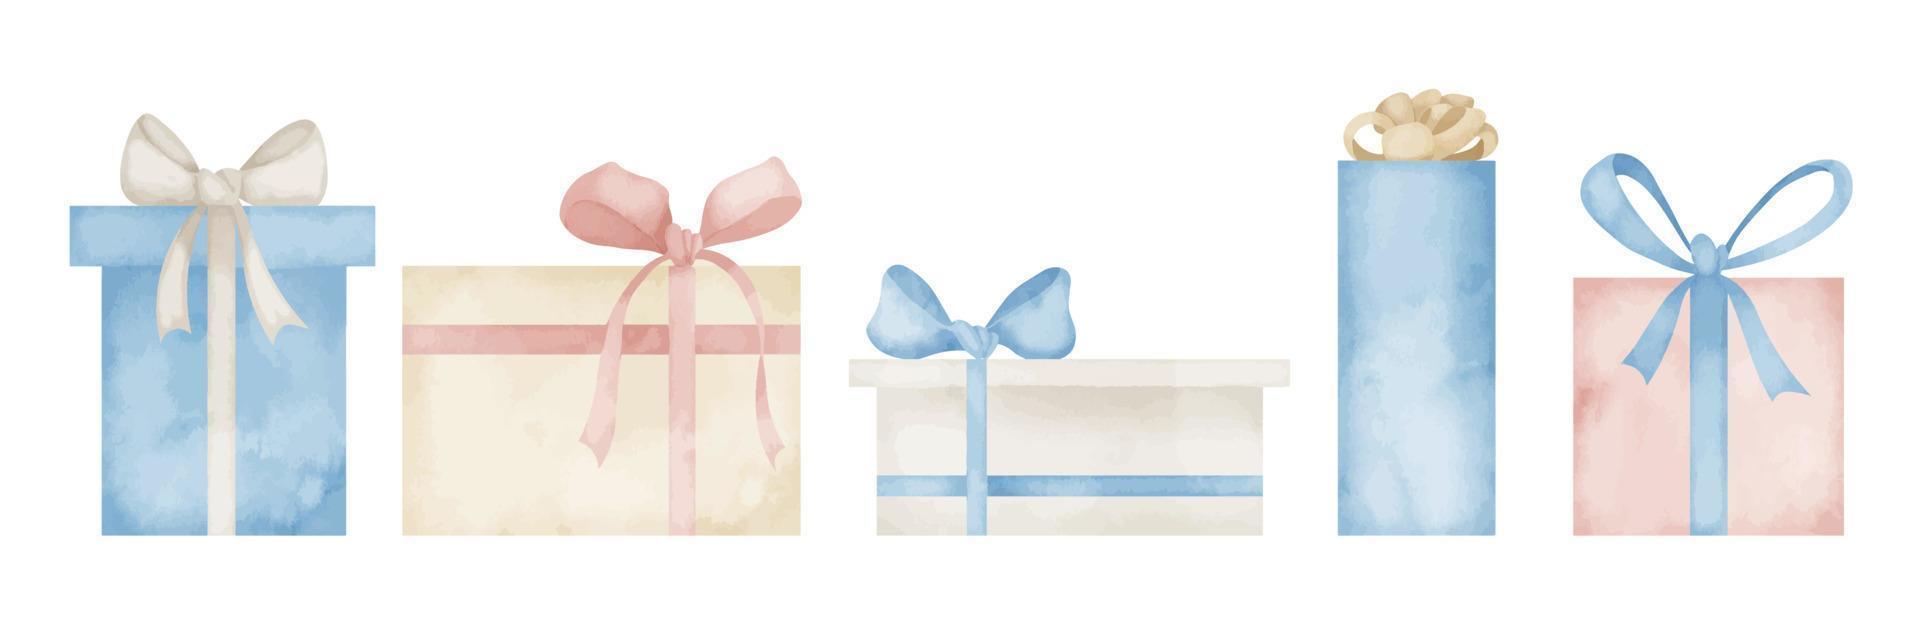 Set of Gift Boxes in pastel watercolor colors. Hand drawn illustration of Presents with ribbons and bows on isolated background. Drawing for happy birthday or Christmas invitation or greeting cards vector